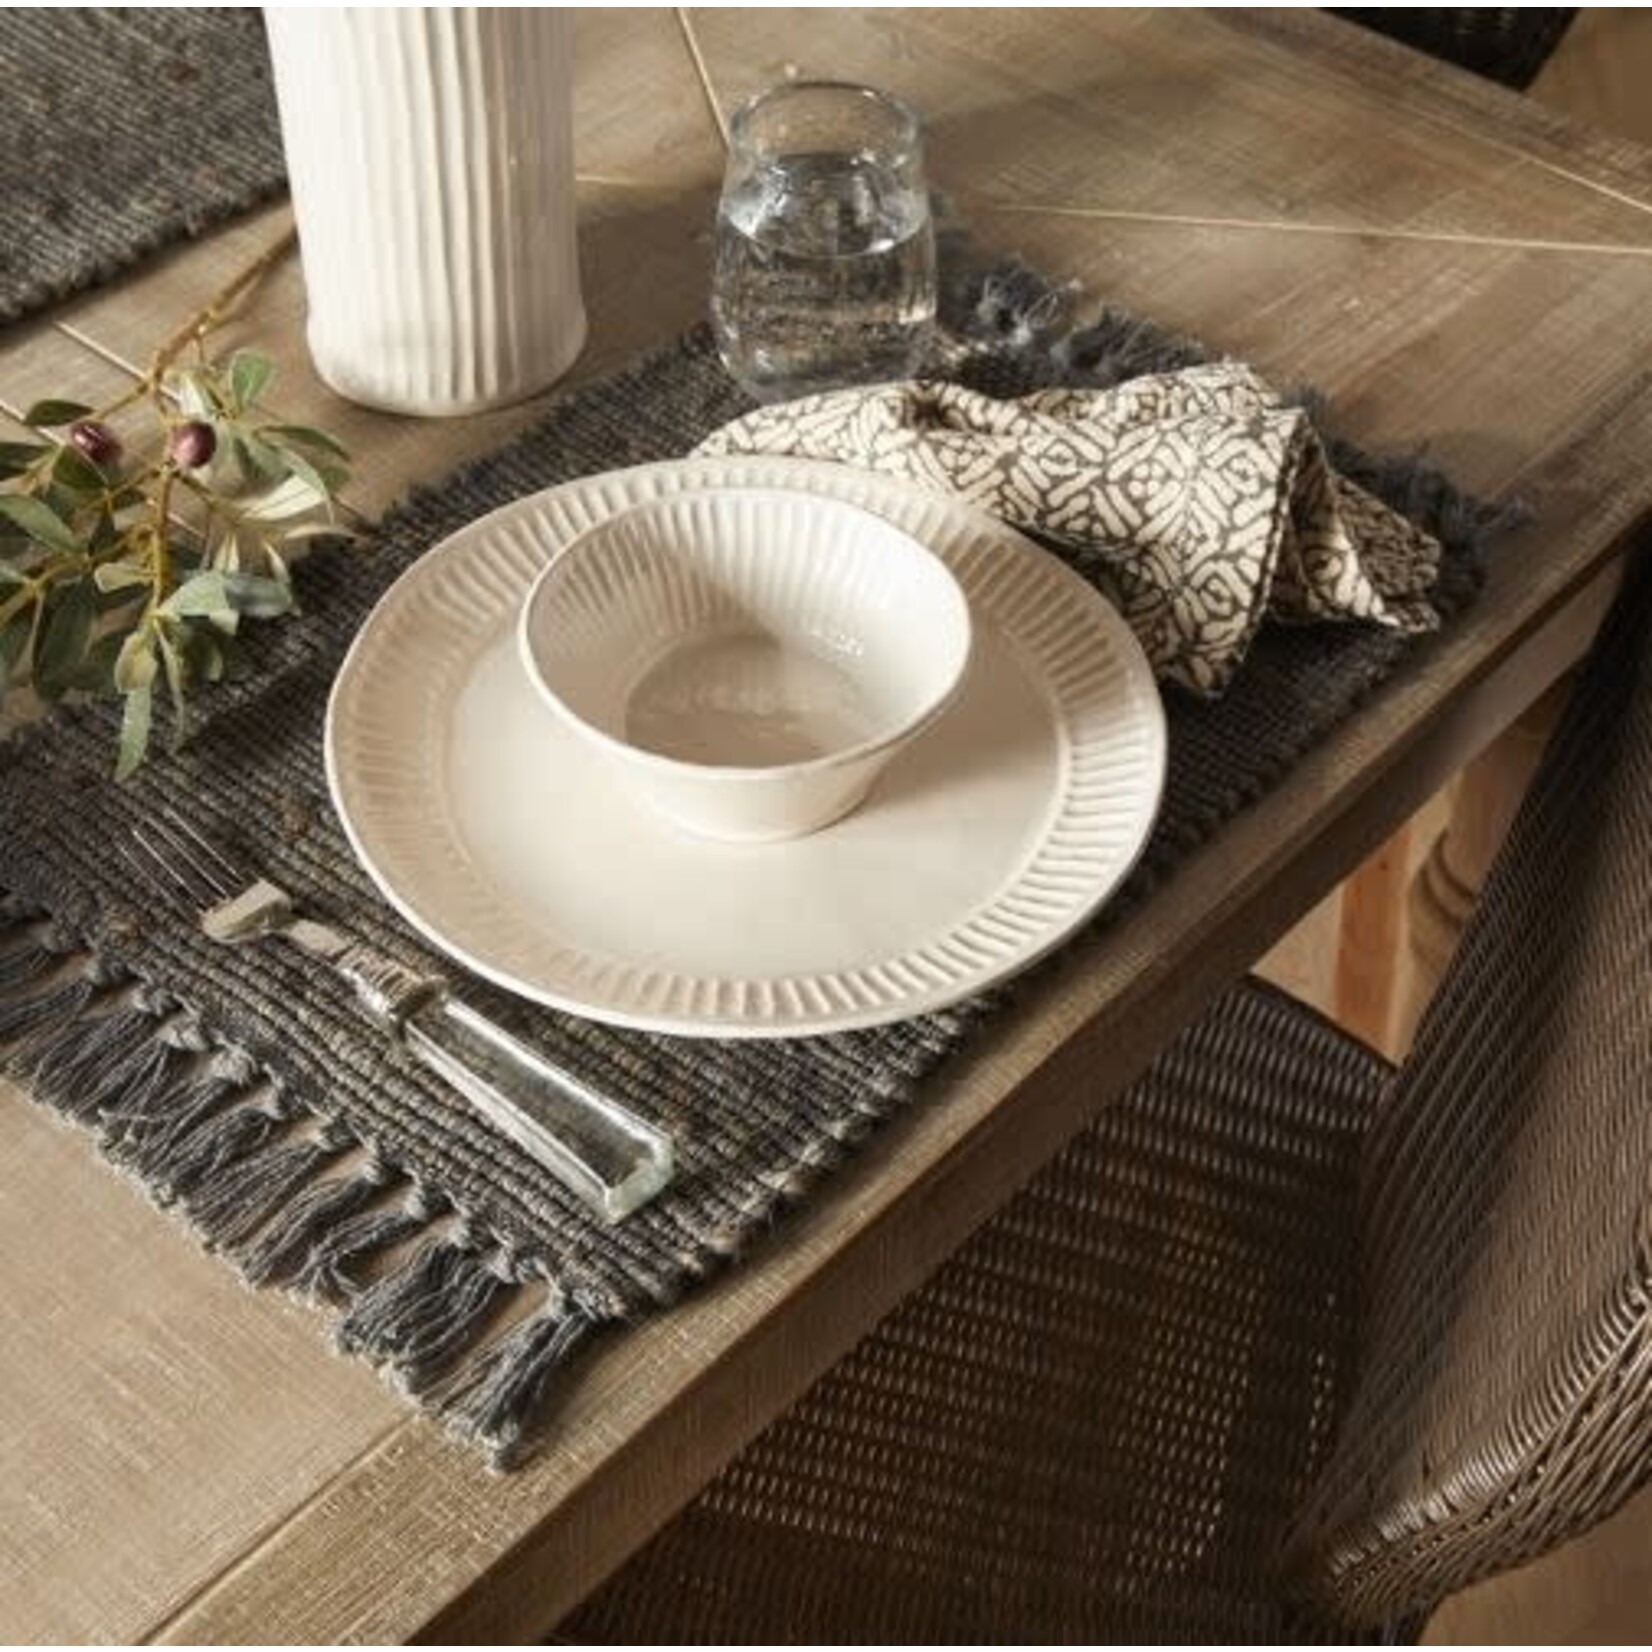 Napa Home and Garden Rae Woven Fringe Placemat